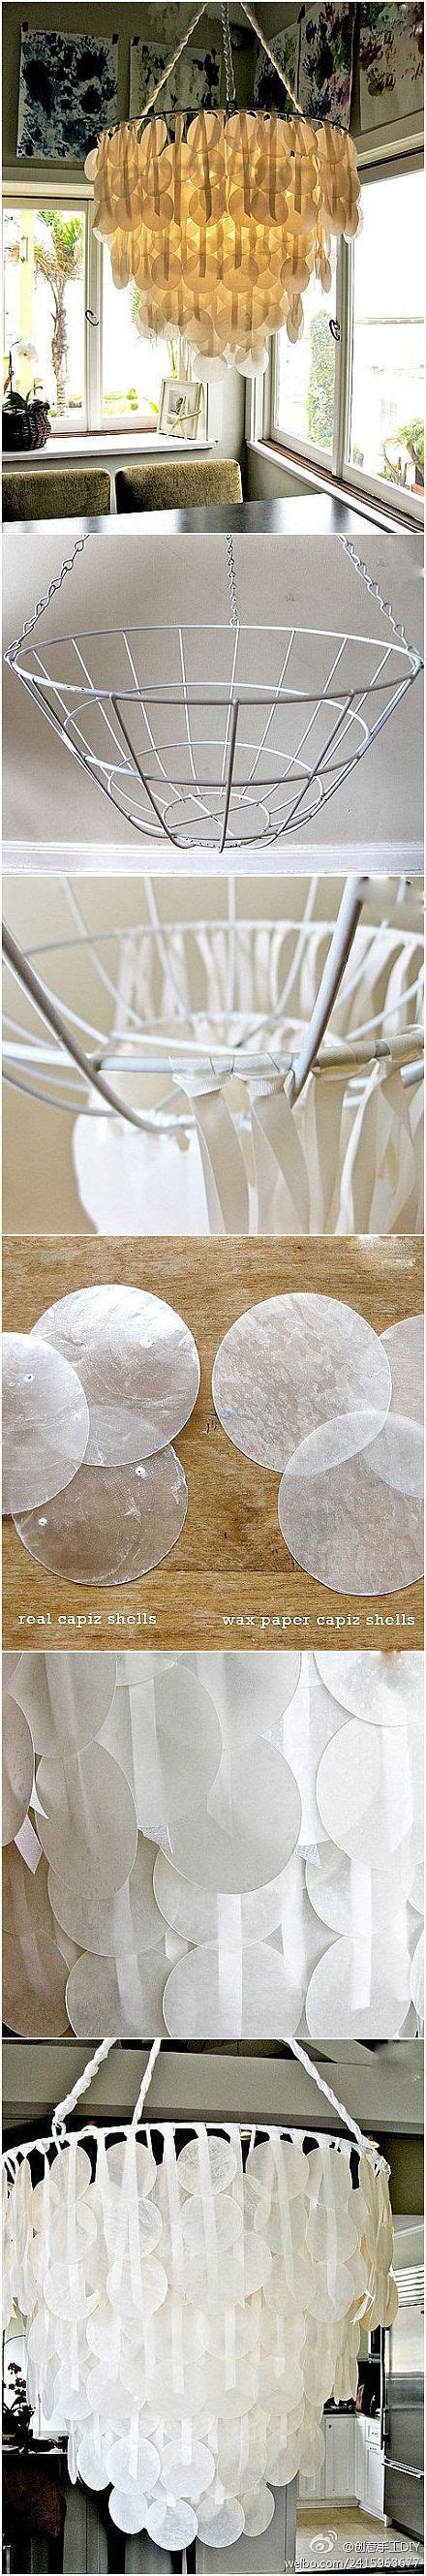 20 Diy Paper Lanterns And Lamps L Easy Paper Craft Ideas